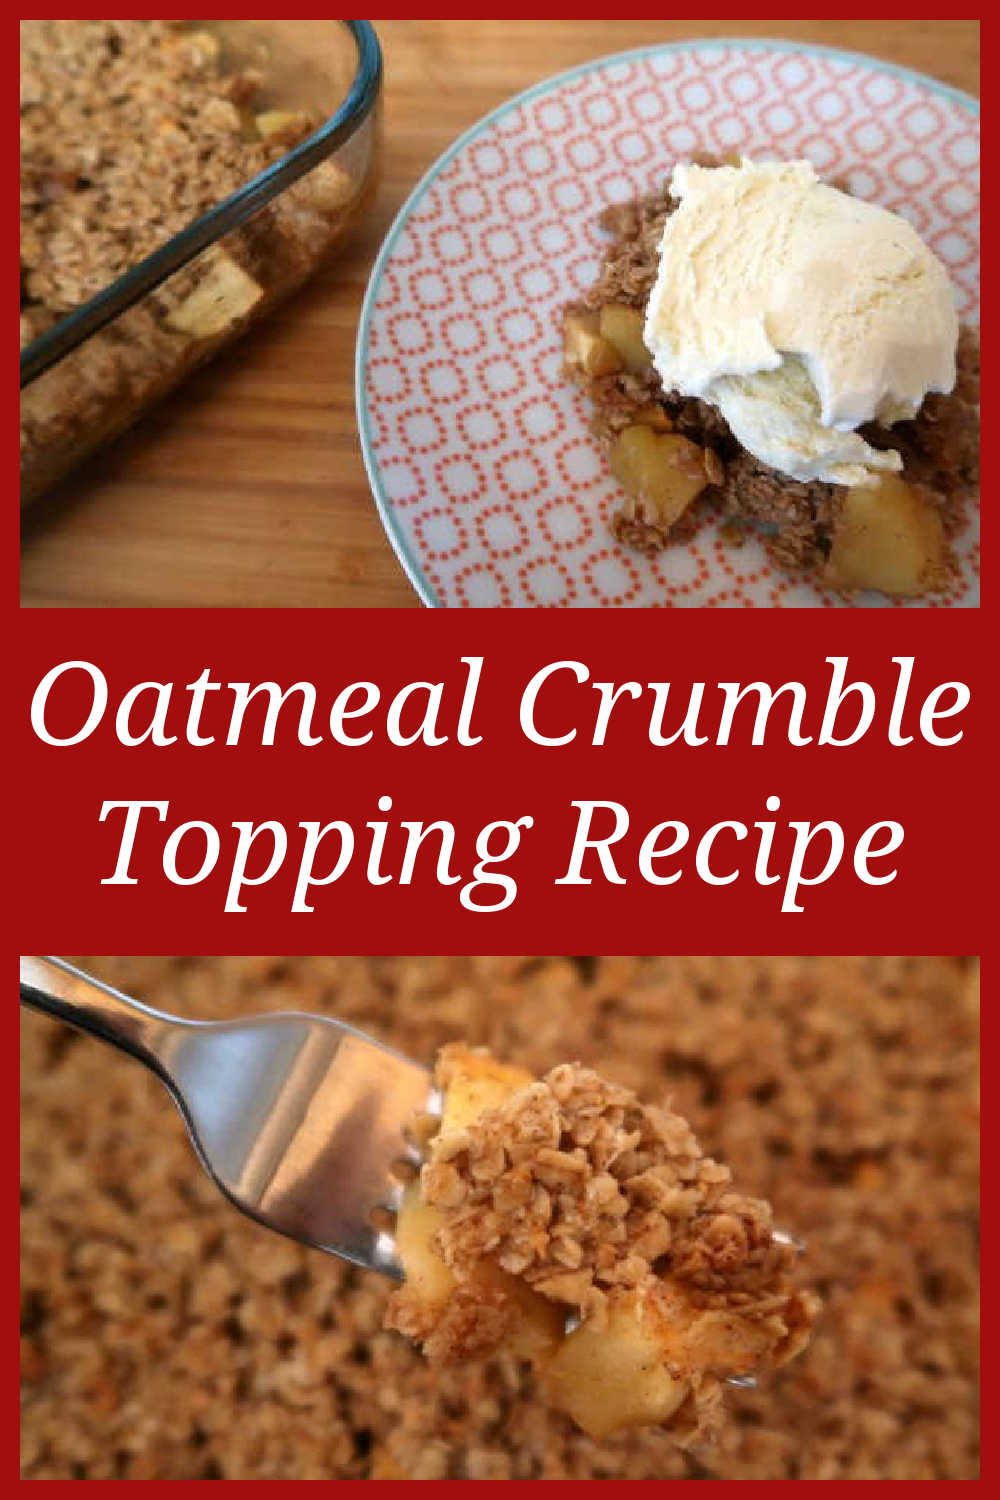 Oatmeal Crumble Topping Recipe - how to make the best easy baked apple, pear or fruit crisp recipe with a crunchy oat crumb.